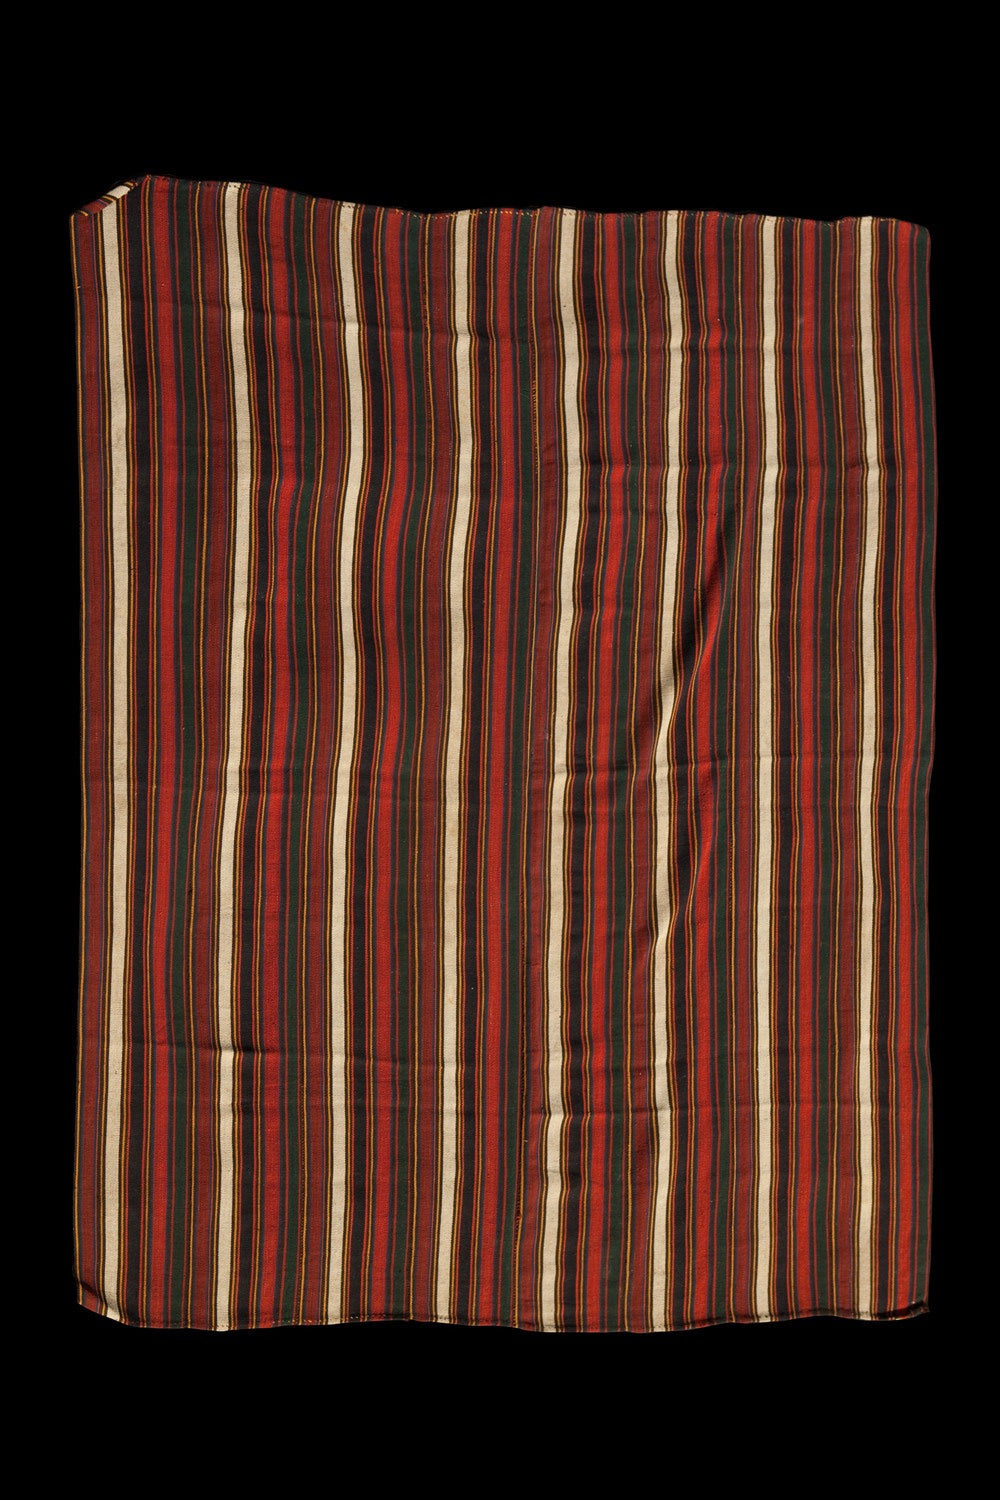 Flat Woven Kilim with Red & Green Stripes and Natural Brown Bands ....................... (7' 4" x 8' 7")